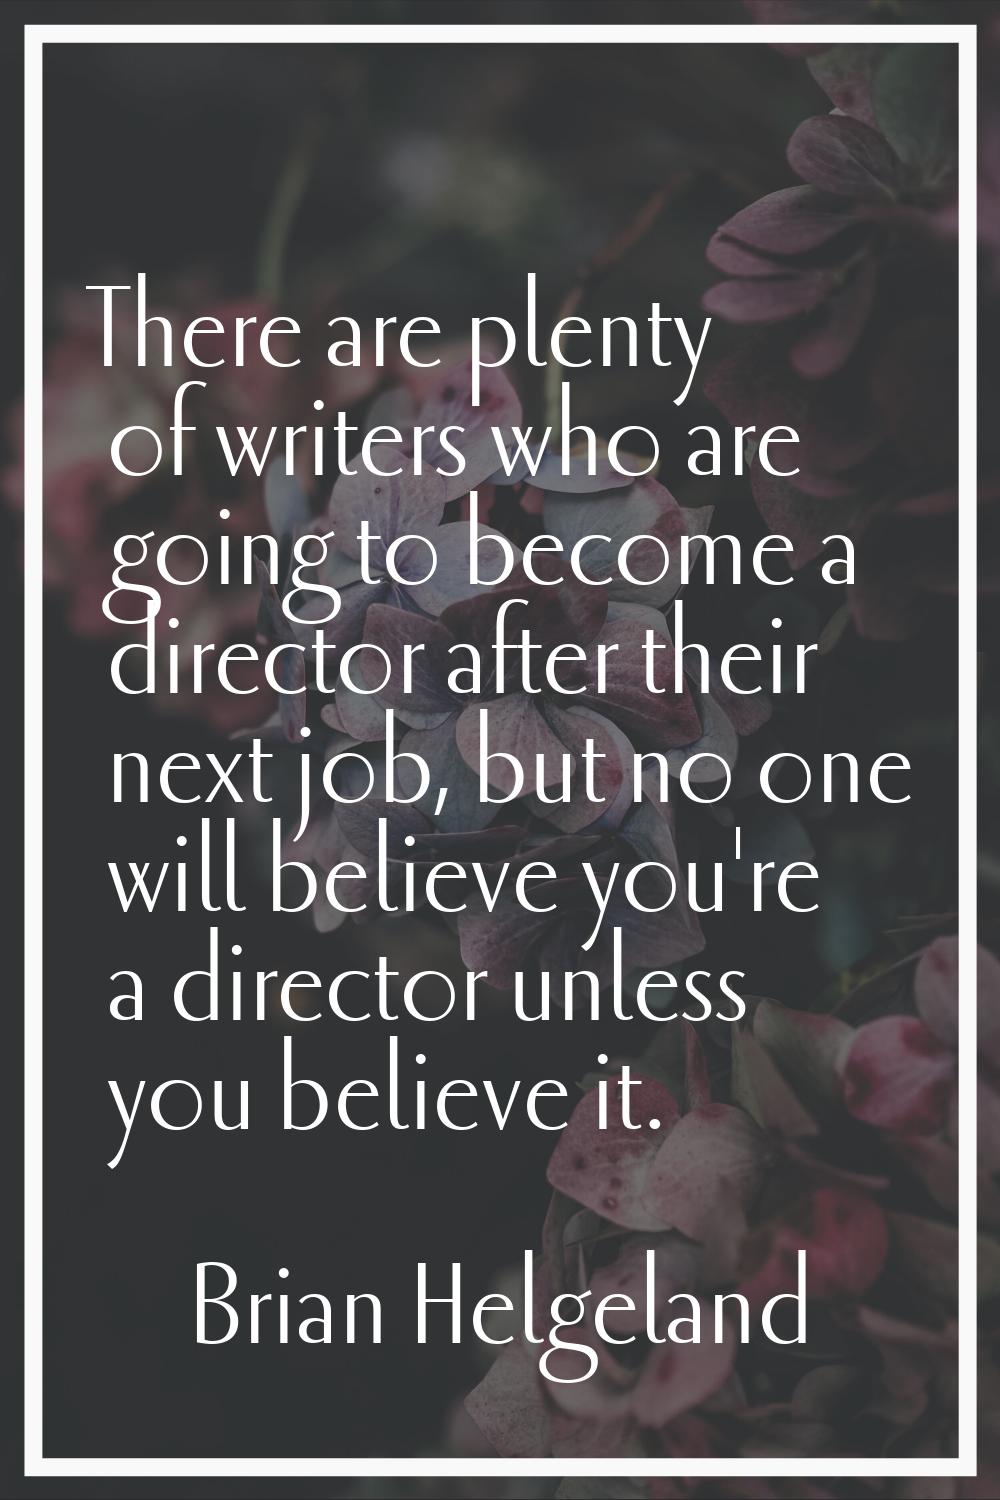 There are plenty of writers who are going to become a director after their next job, but no one wil